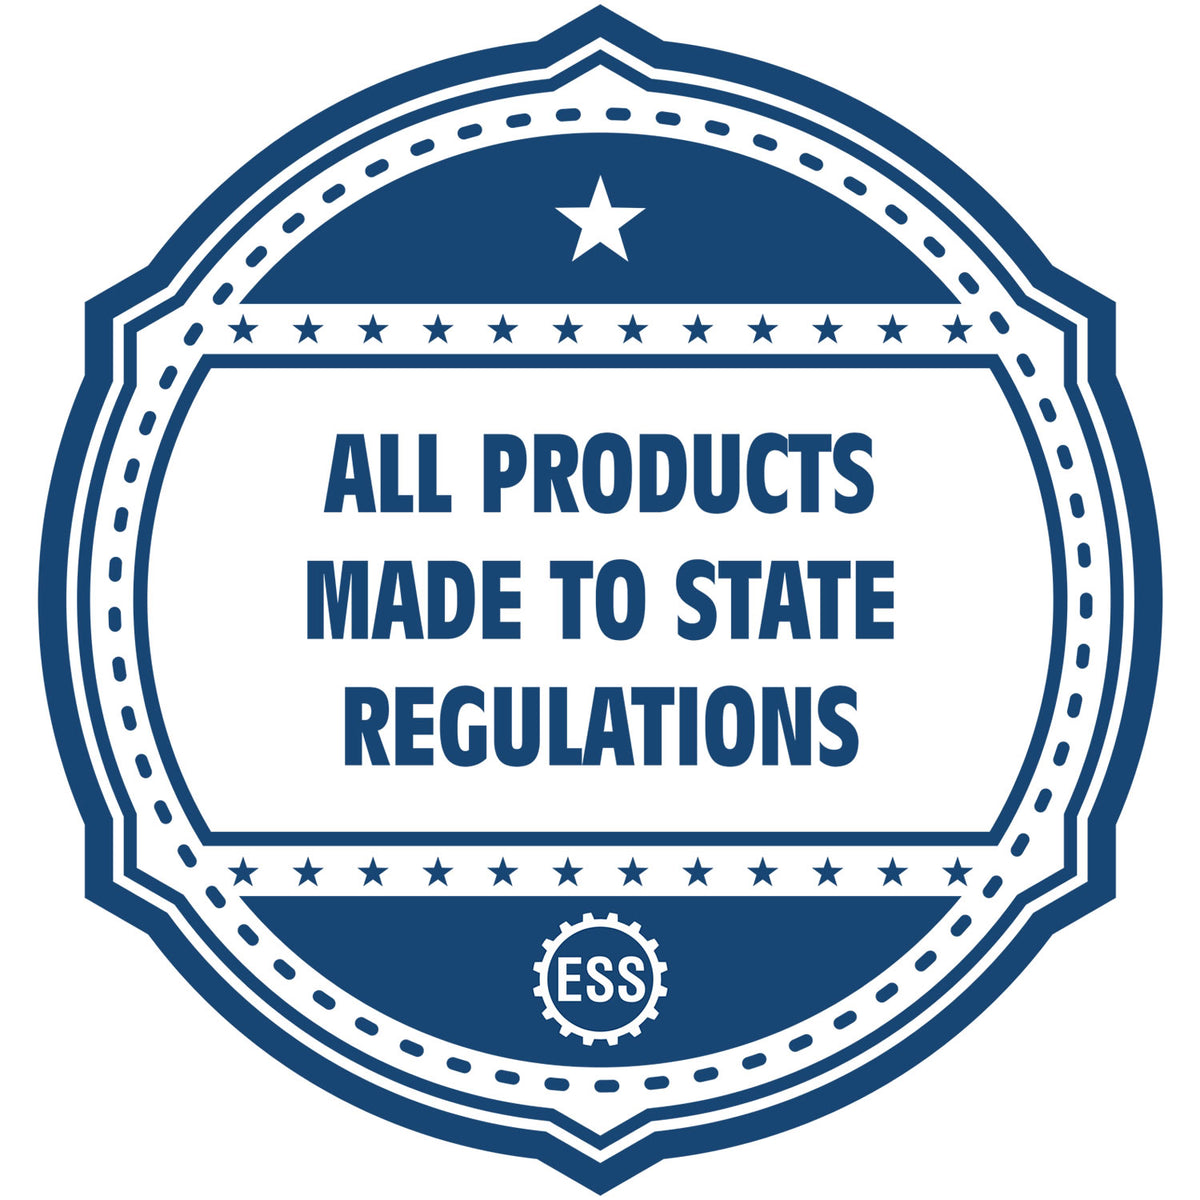 An icon or badge element for the New York Professional Engineer Seal Stamp showing that this product is made in compliance with state regulations.